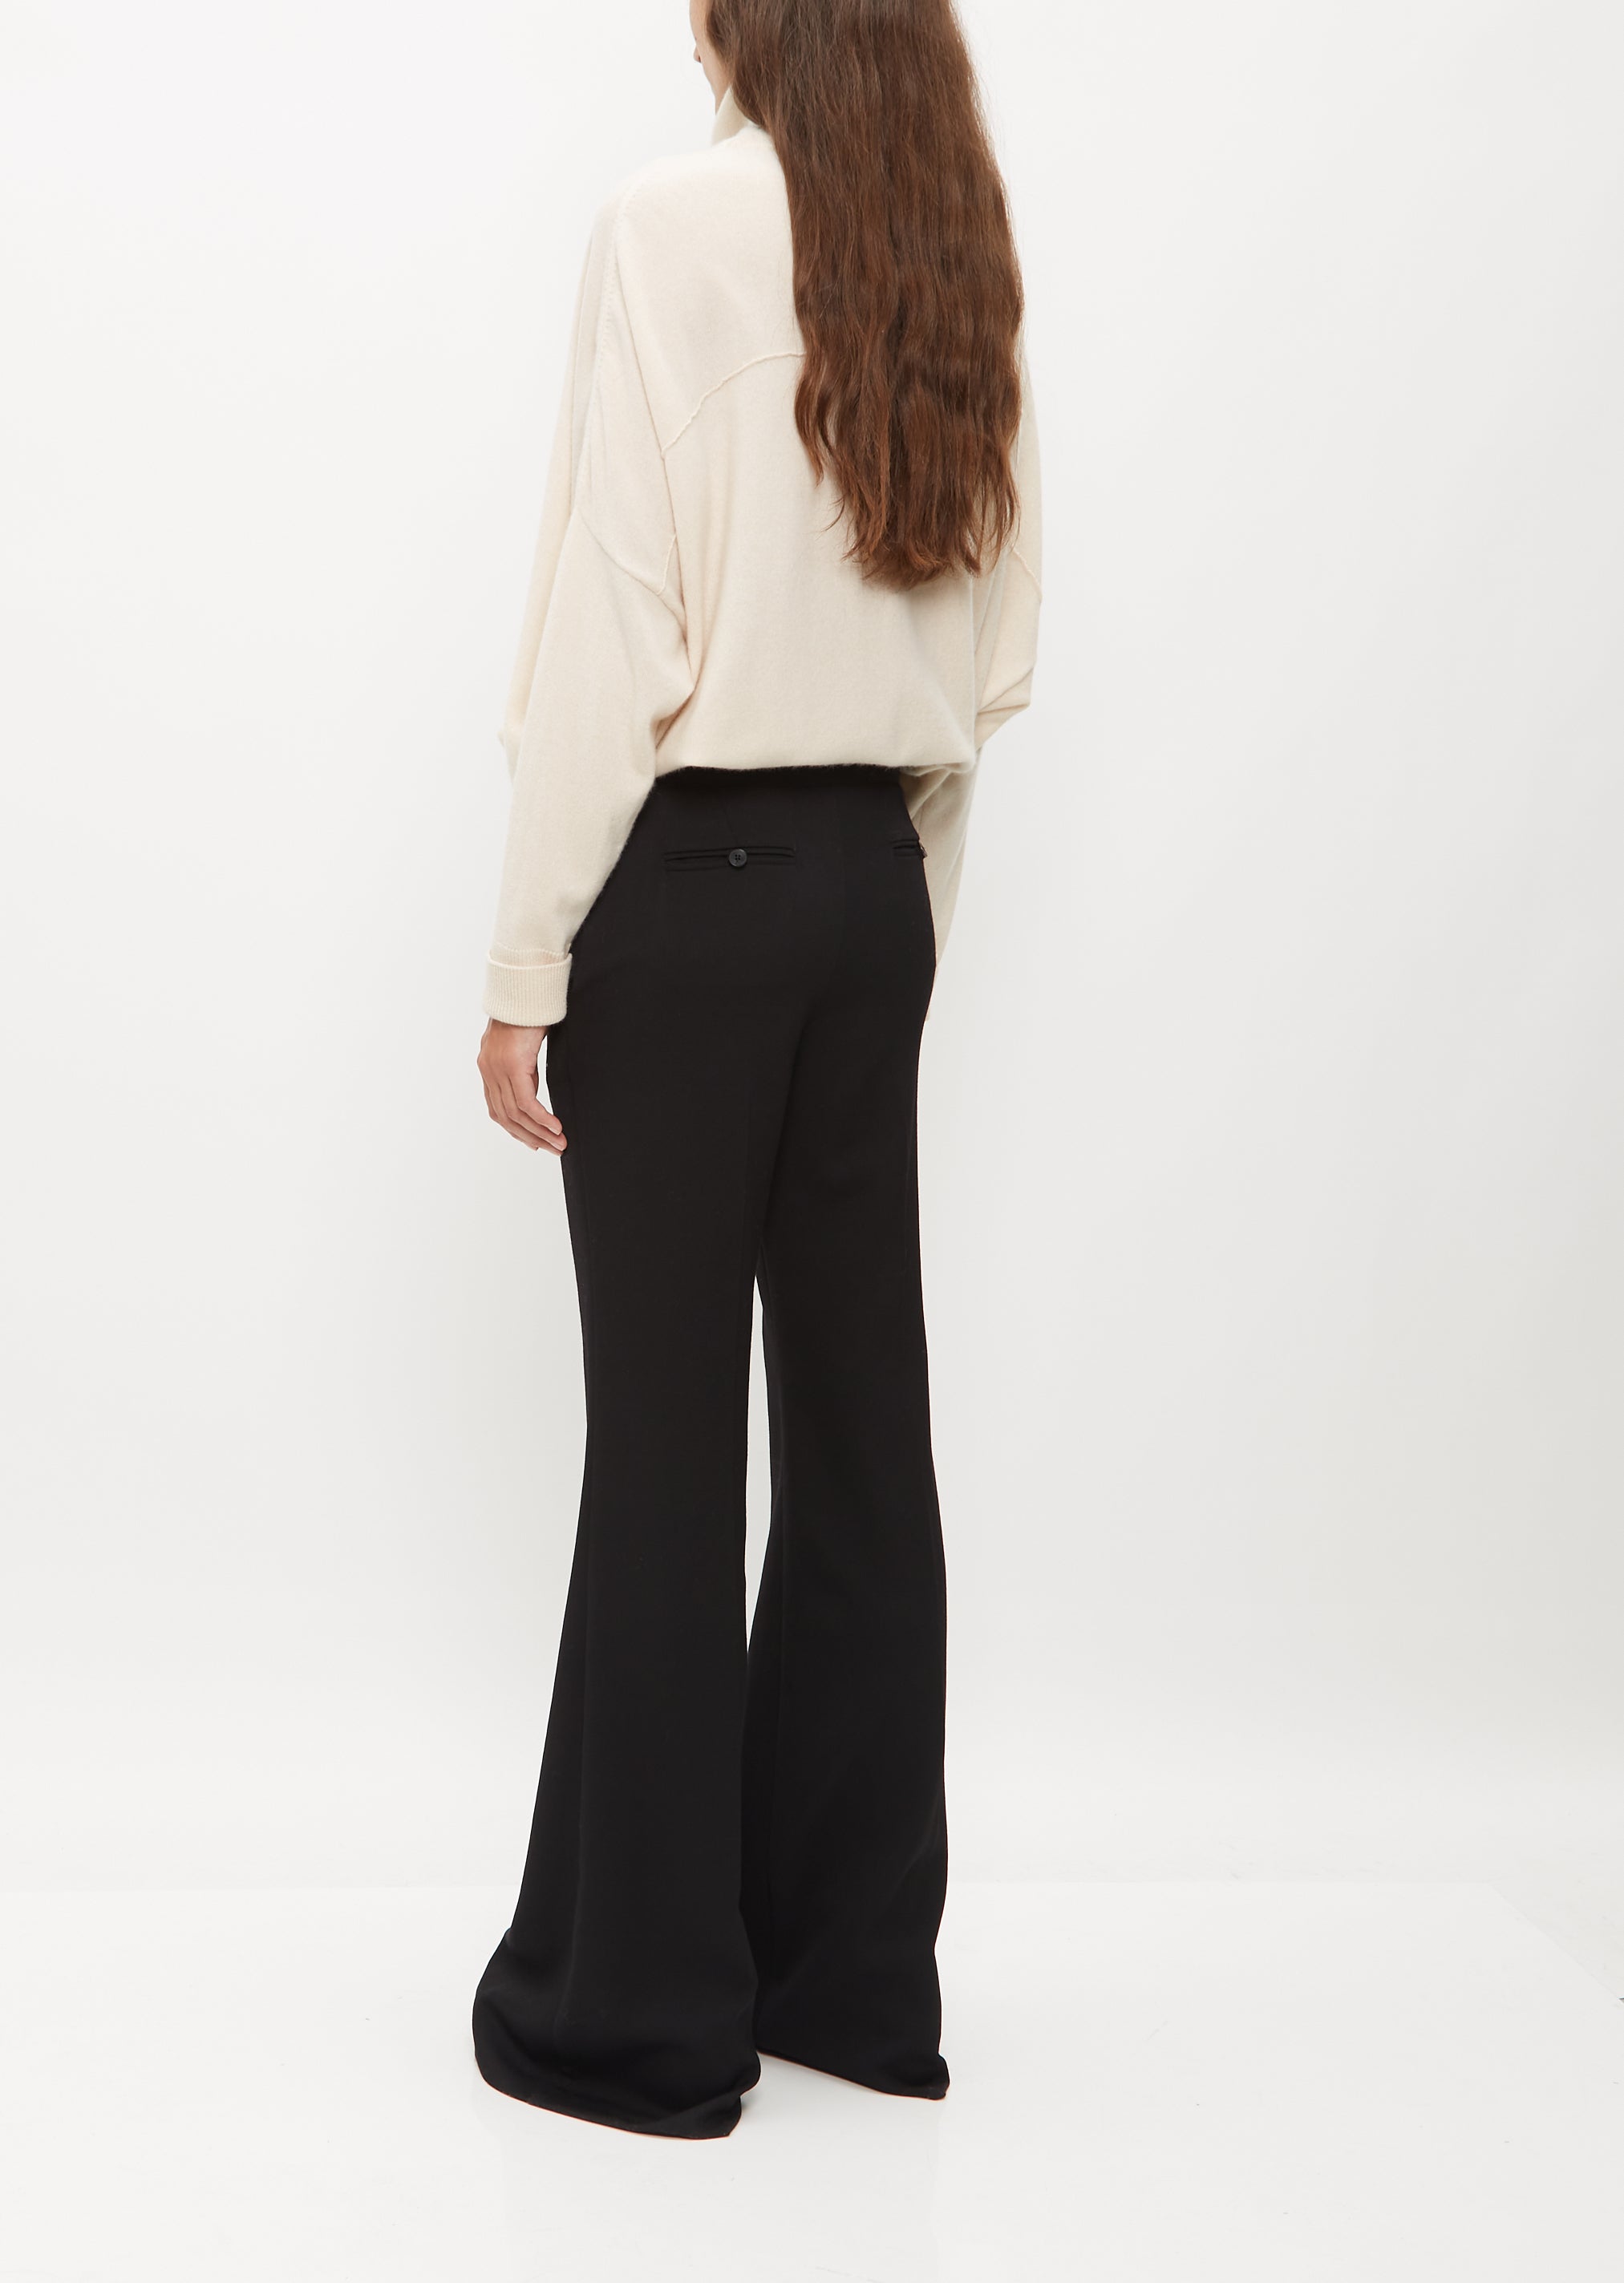 Buy NUSH Womens Solid Bootcut Trousers